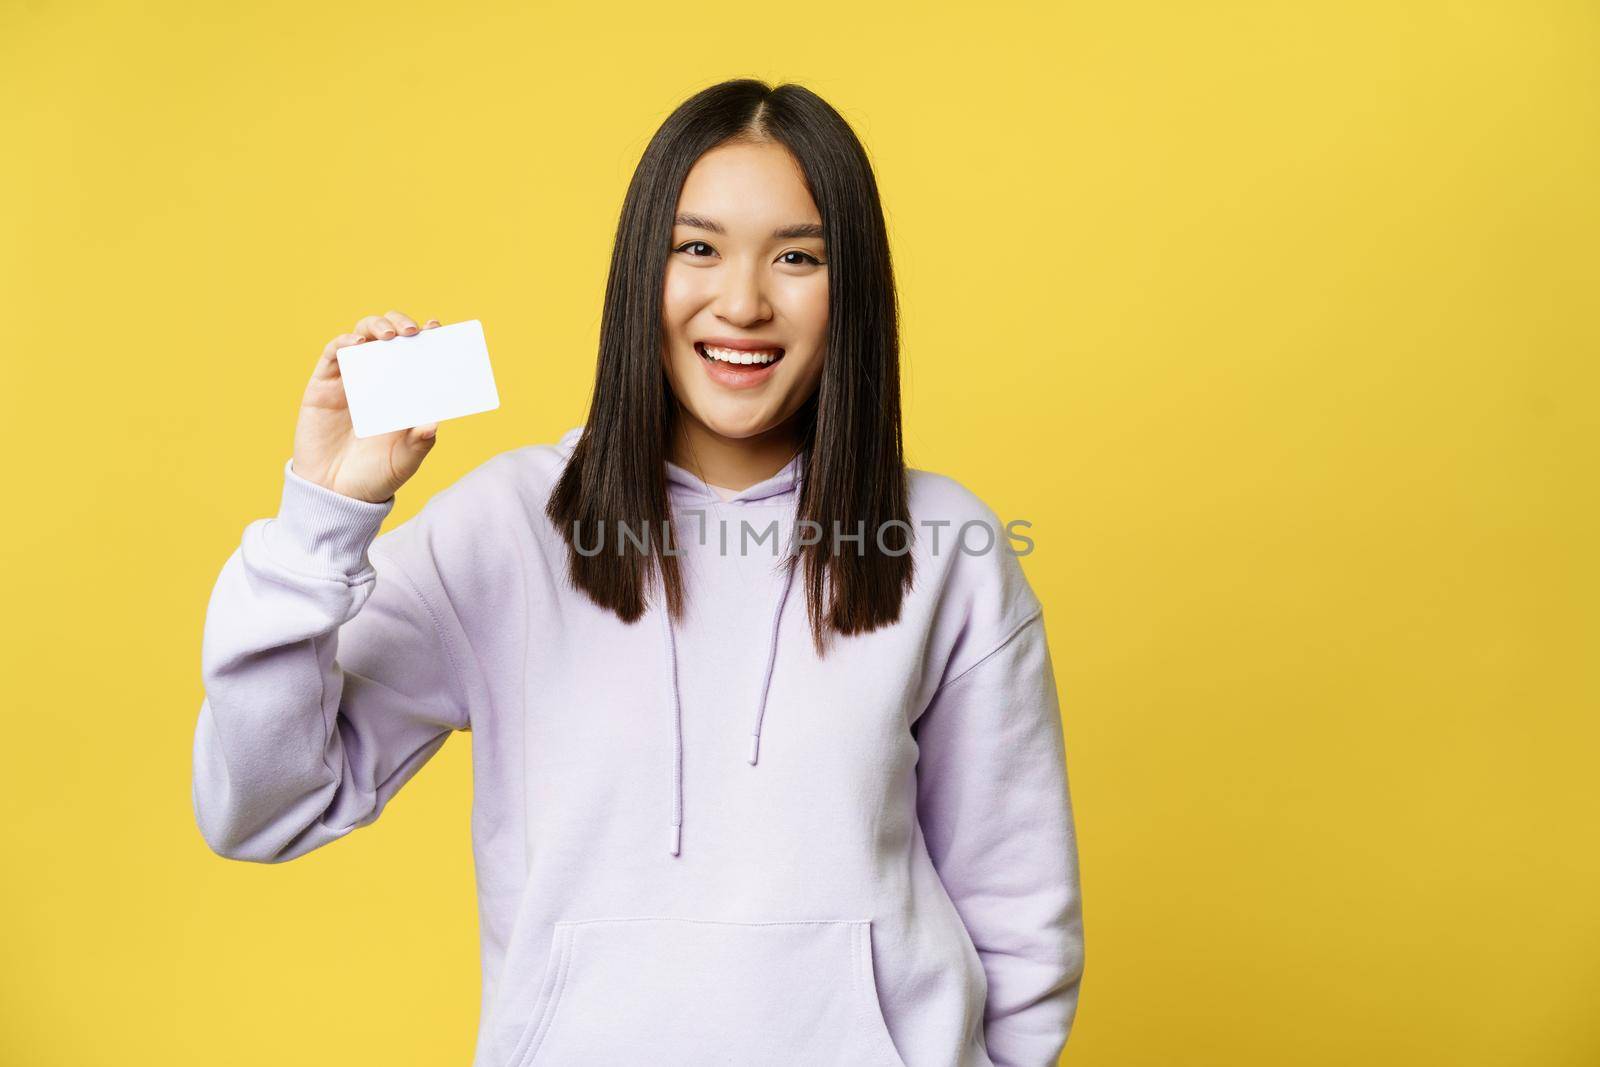 Shopping. Smiling asian woman showing card in her hand, standing over yellow background.